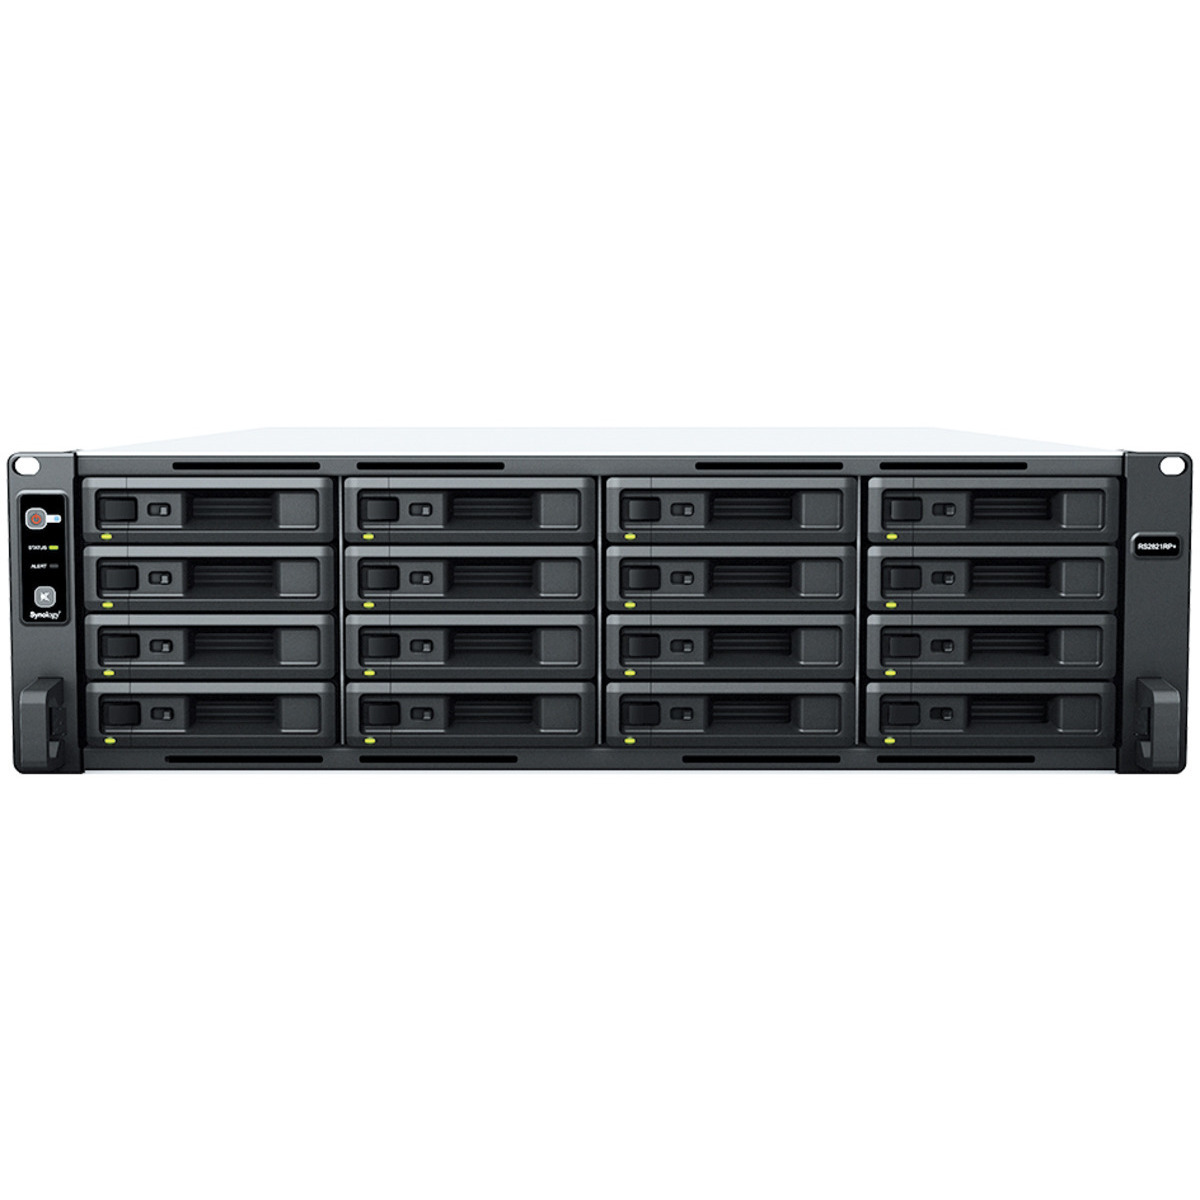 buy $5937 Synology RackStation RS2821RP+ 64tb RackMount NAS - Network Attached Storage Device 16x4000gb Western Digital Blue WD40EZRZ 3.5 5400rpm SATA 6Gb/s HDD CONSUMER Class Drives Installed - Burn-In Tested - nas headquarters buy network attached storage server device das new raid-5 free shipping usa christmas new year holiday sale RackStation RS2821RP+